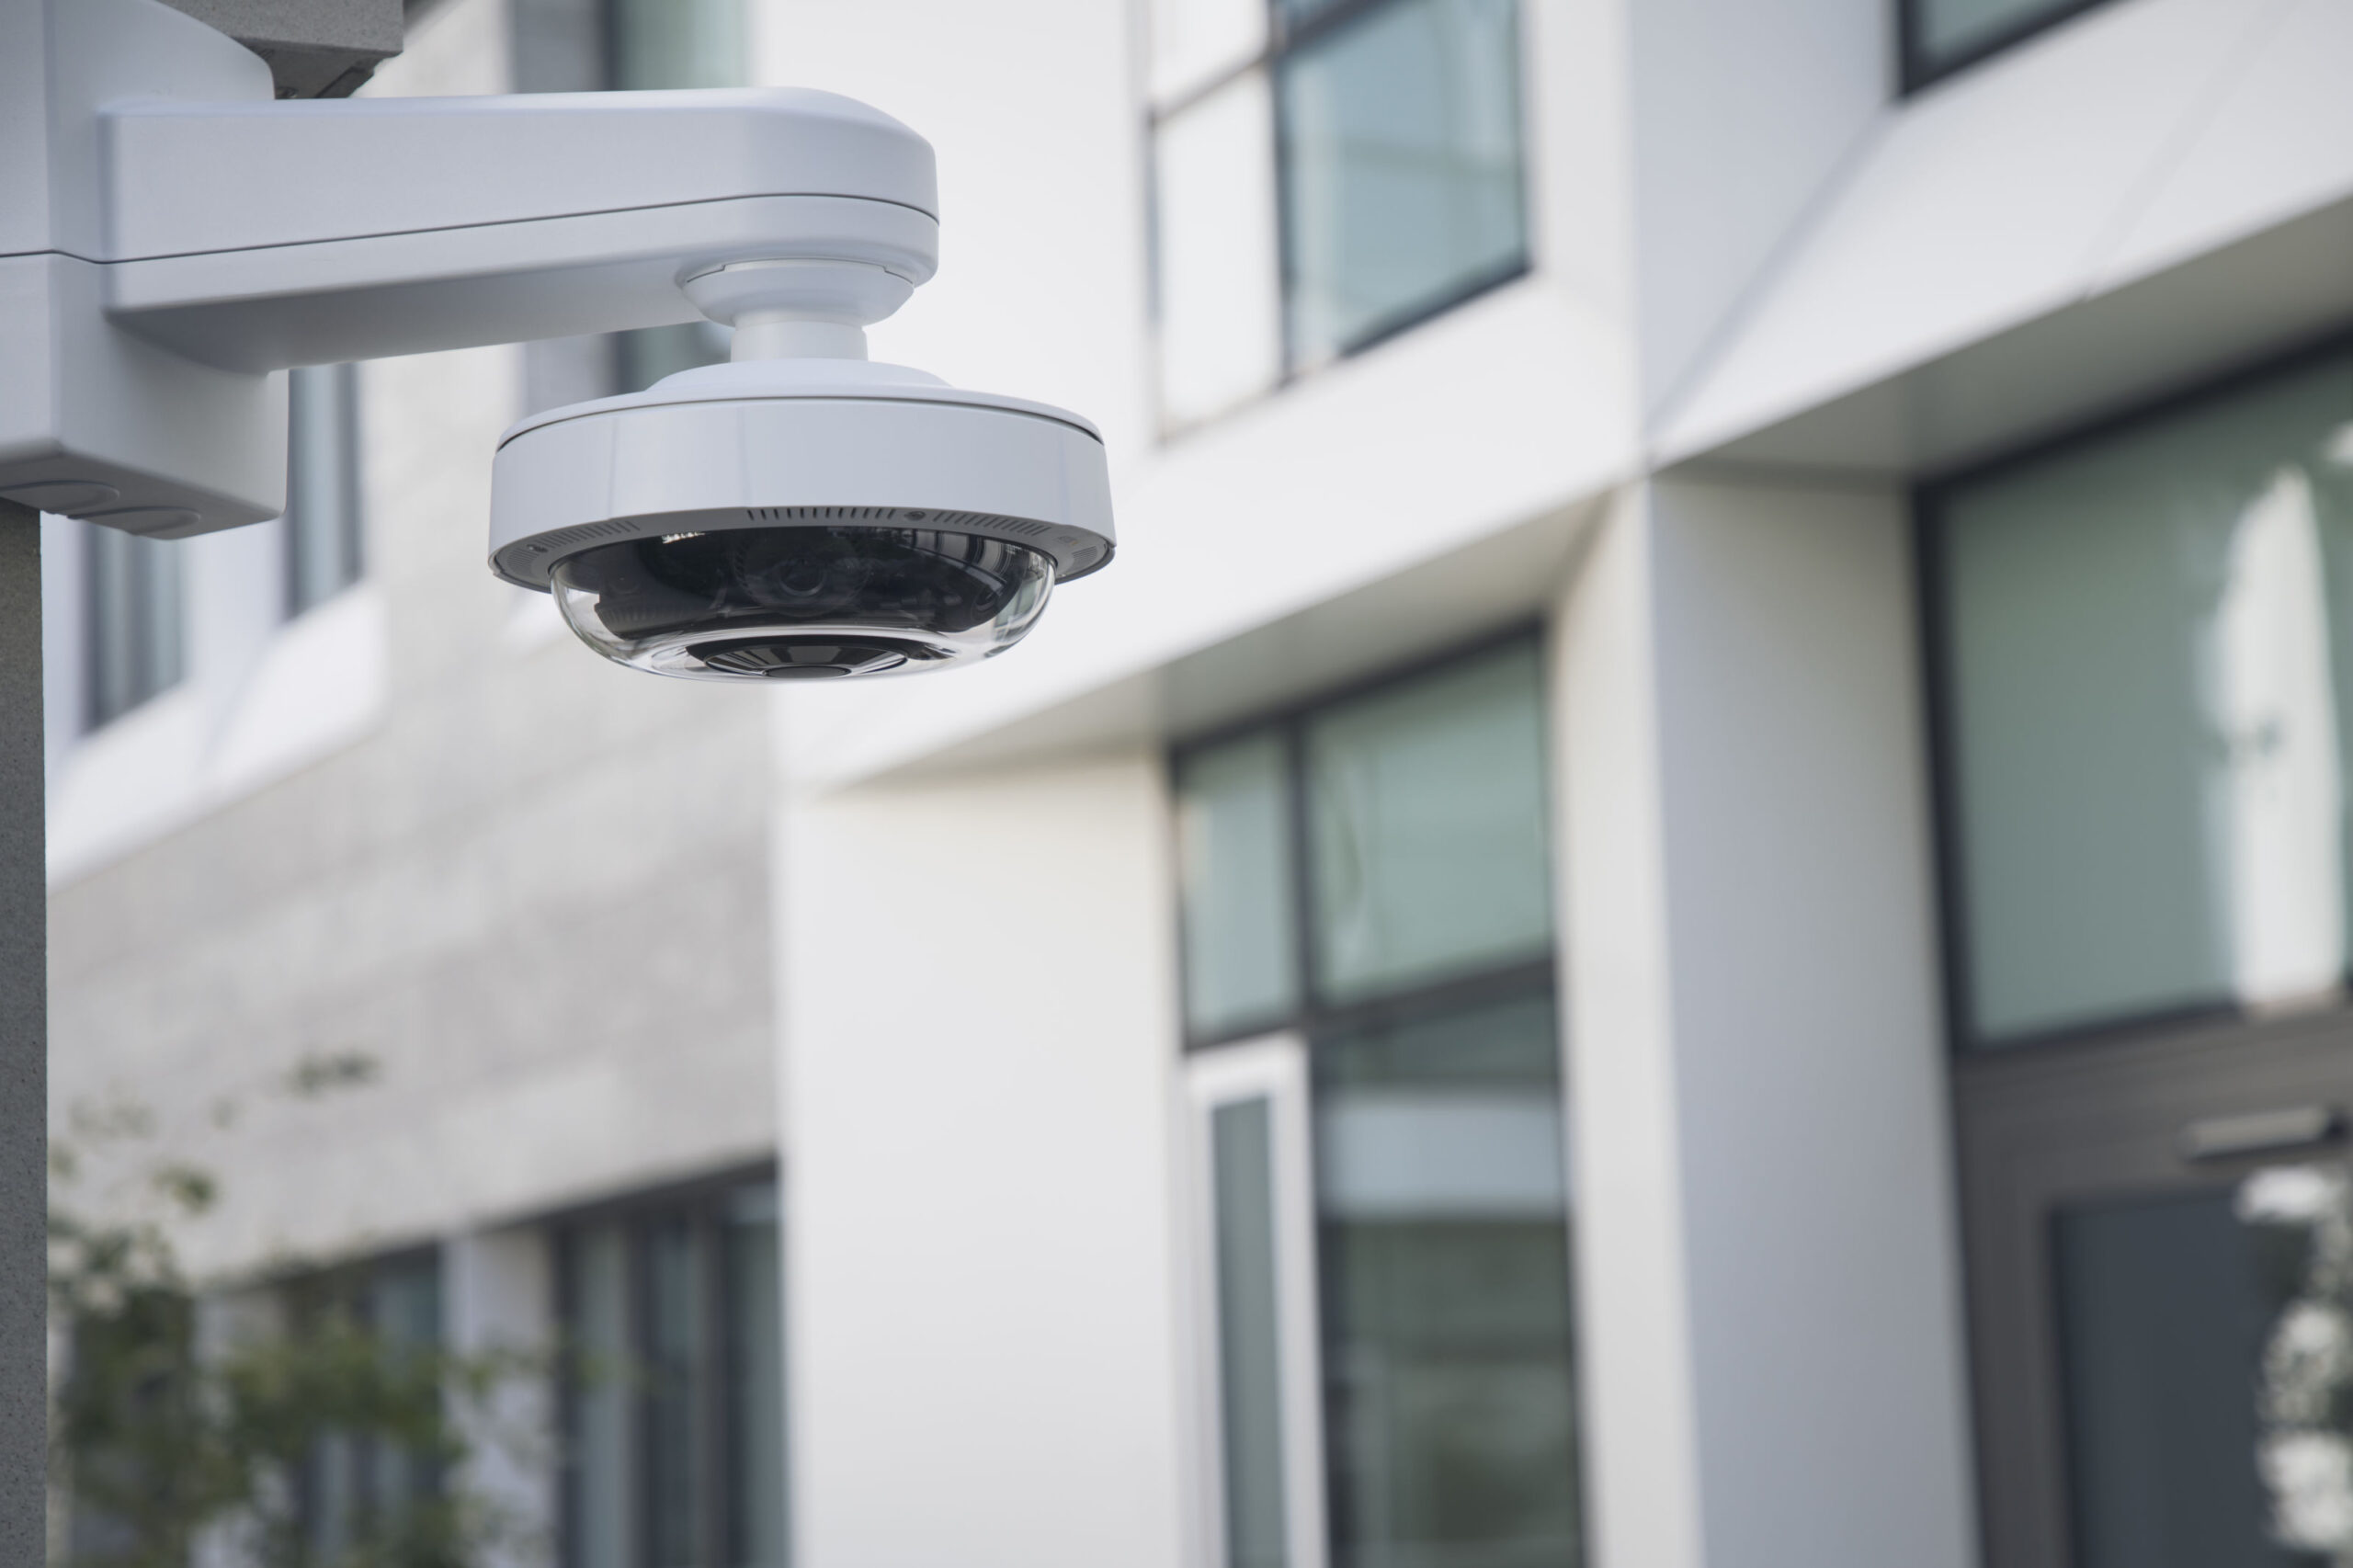 A panoramic dome video security camera placed on a pole to monitor the outside of a building.